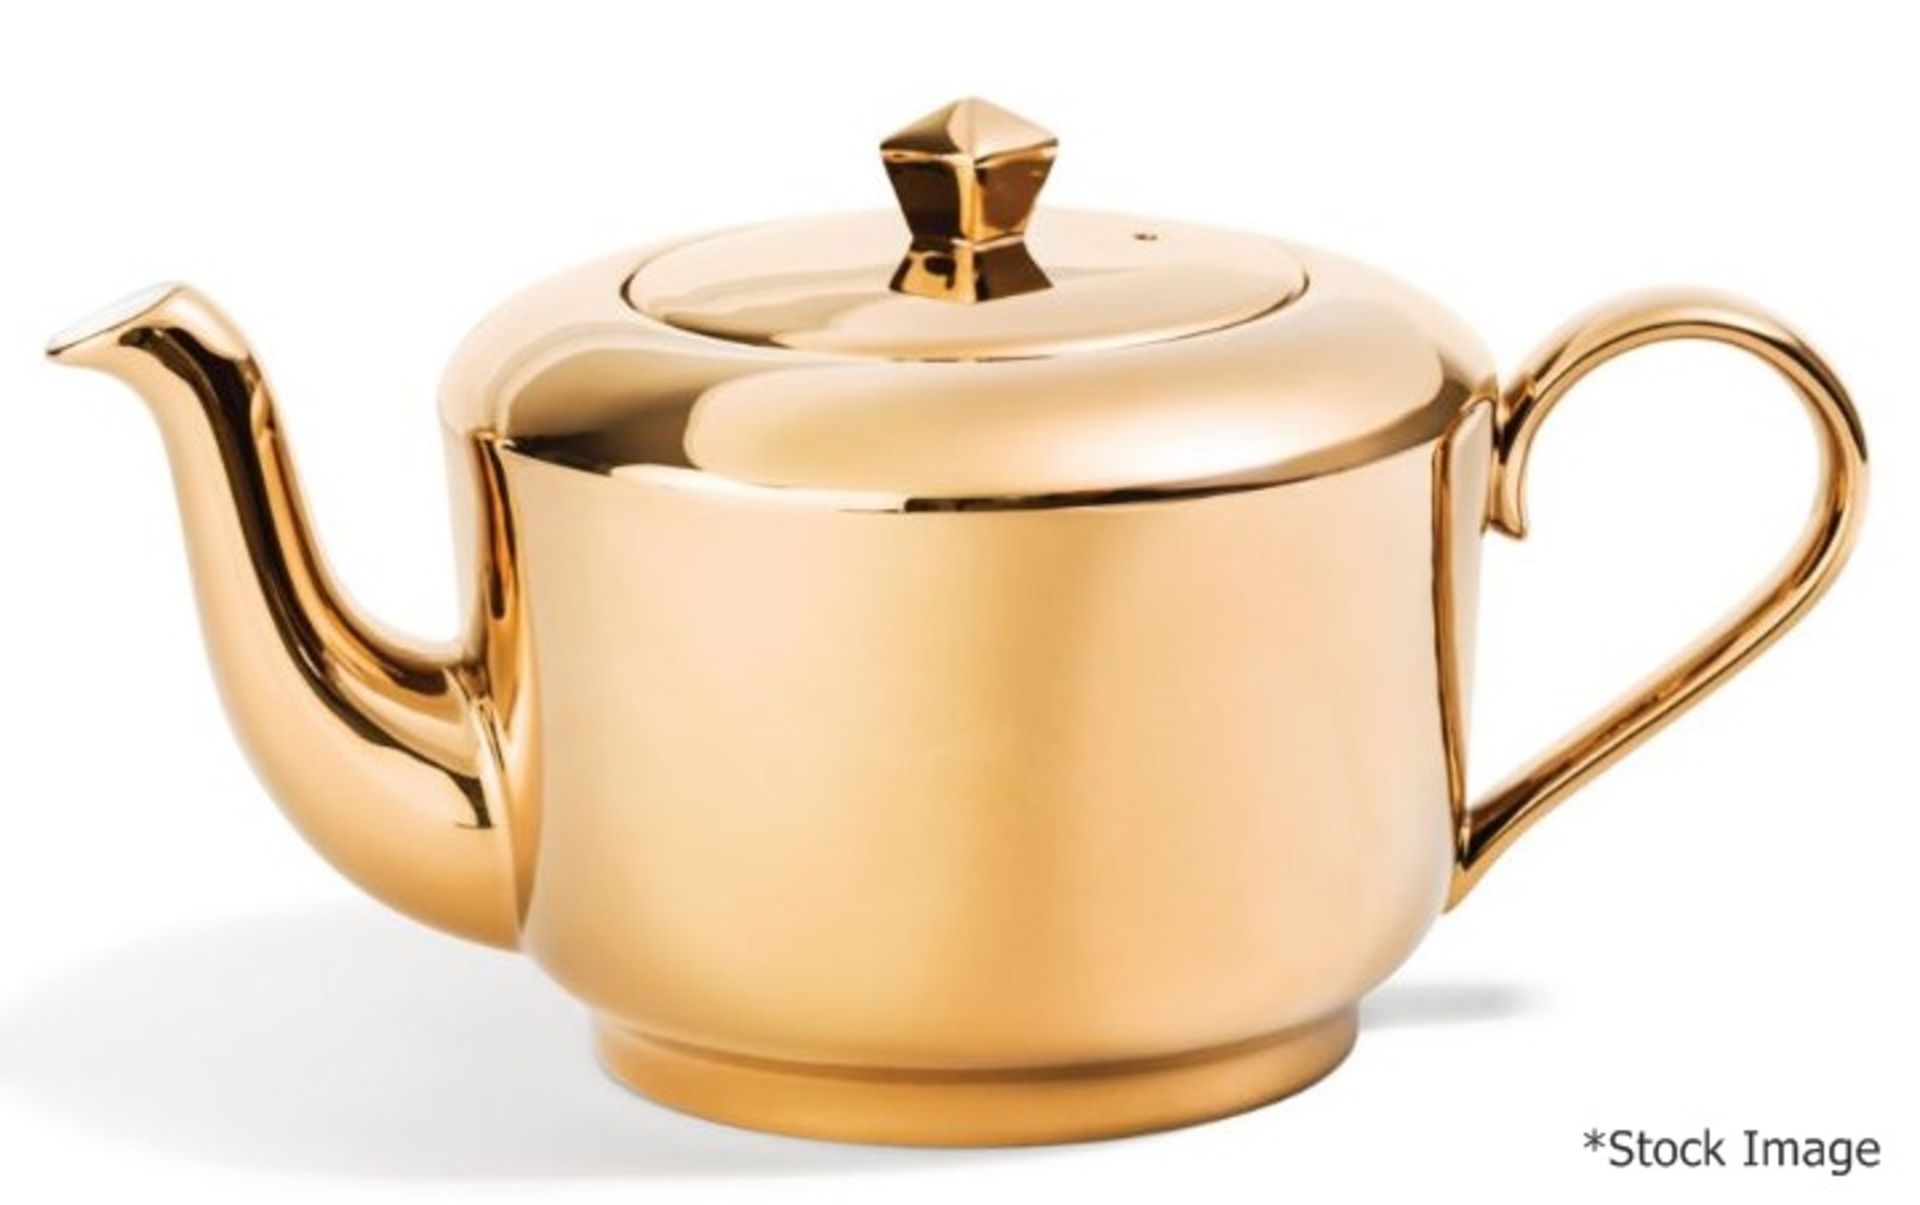 1 x RICHARD BRENDON 'Reflect' Fine Bone China Teapot In Gold - Original Price £250.00 *See Condition - Image 3 of 9